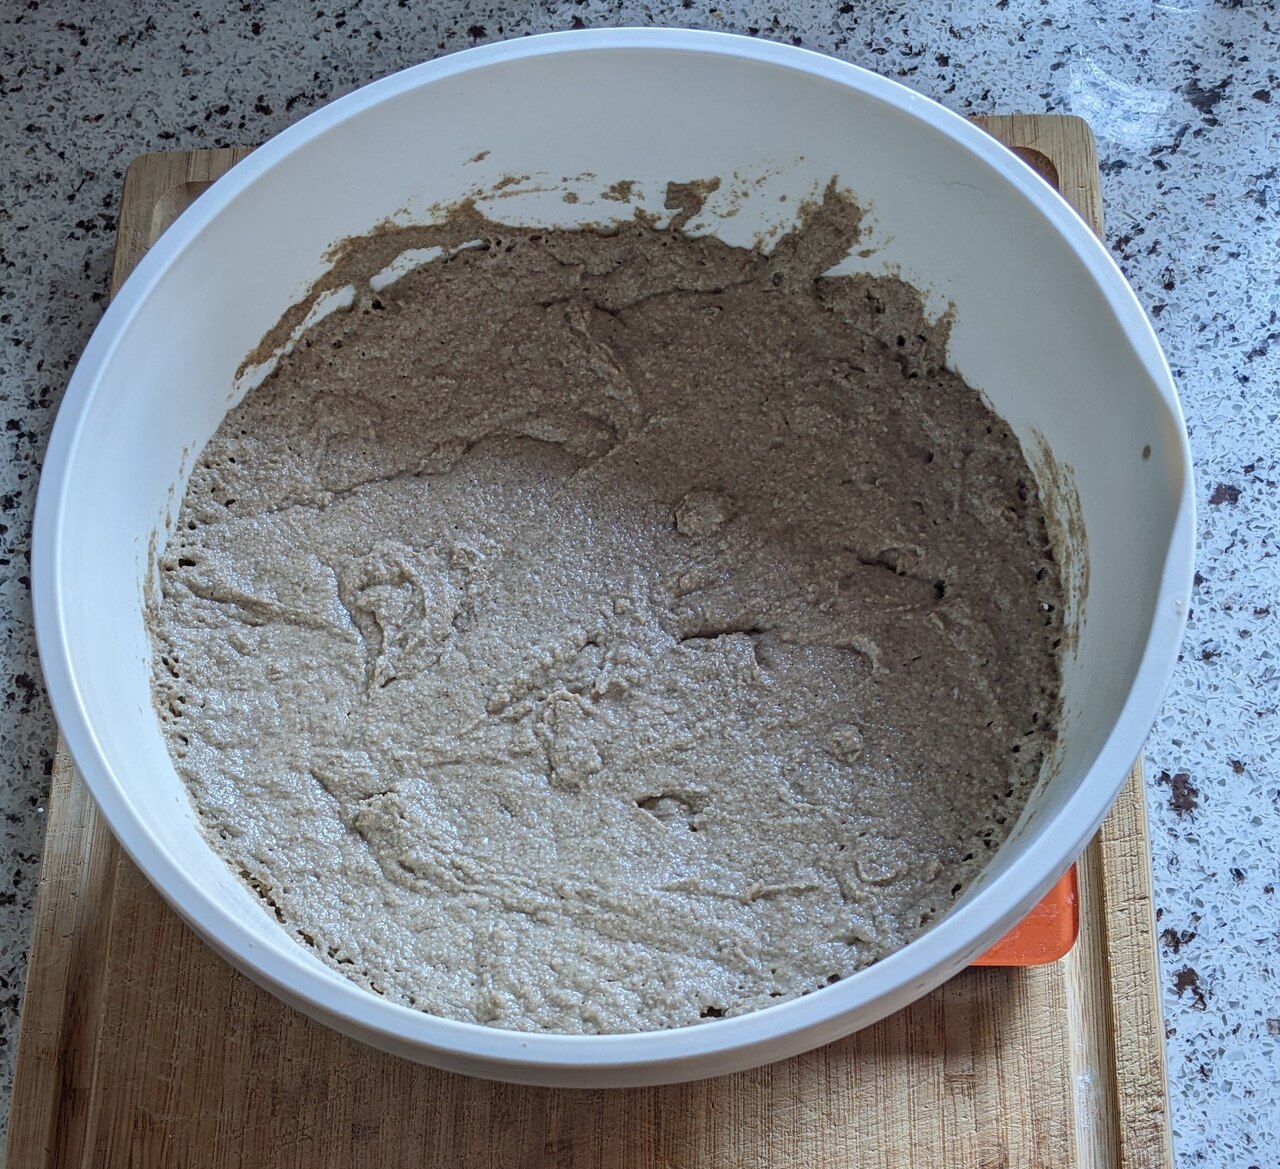 The pre dough has risen. Ideally the middle is slightly elevated and has not yet fallen in (the dough in this picture was not given enough time)